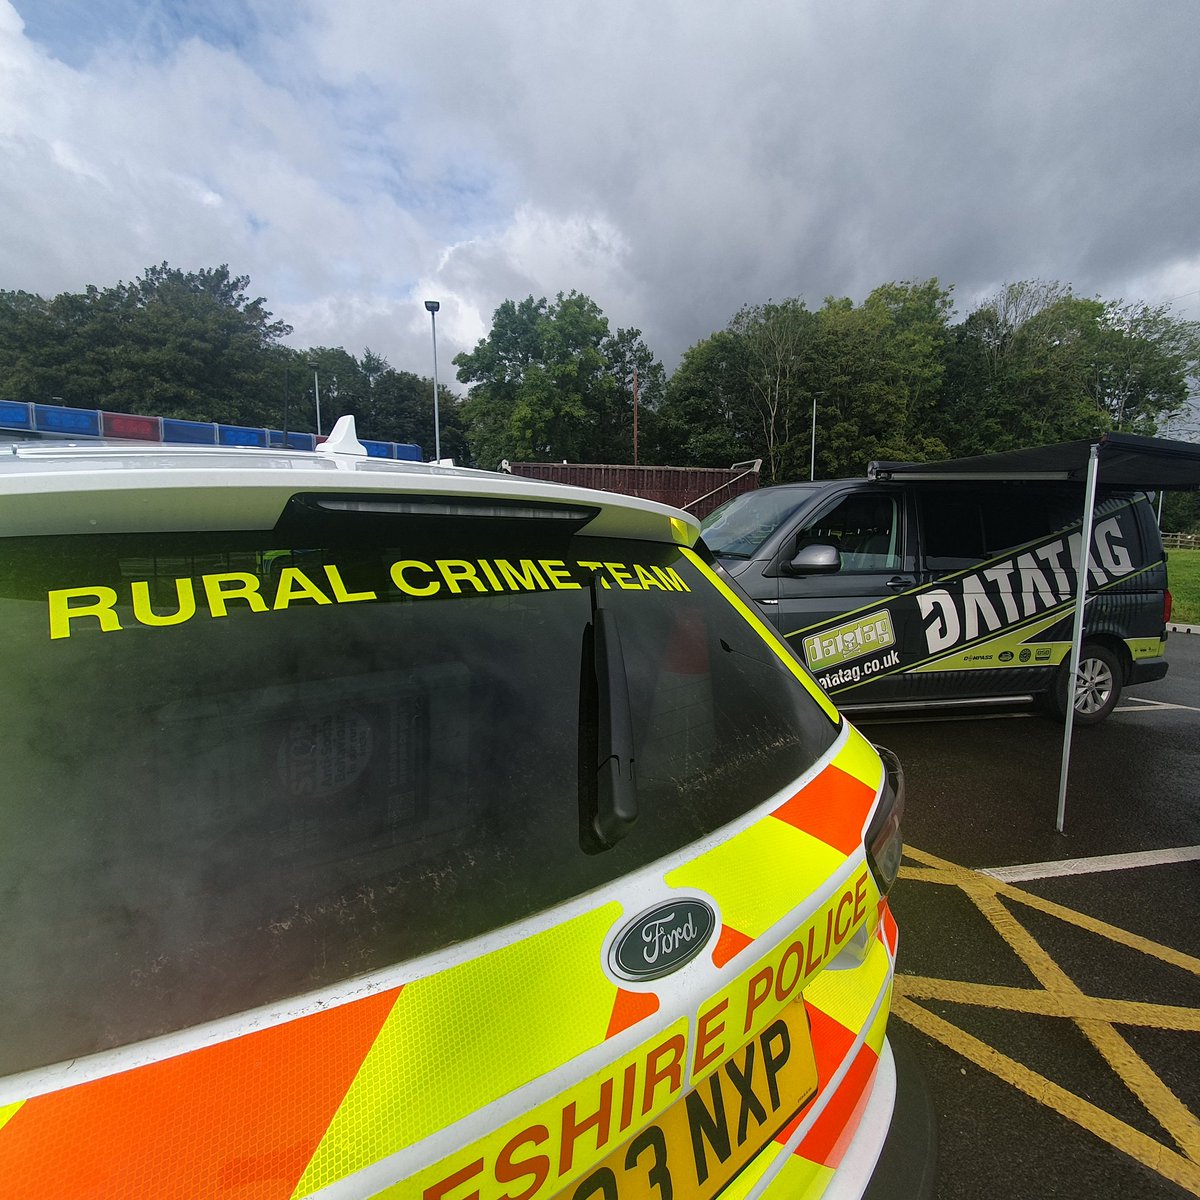 Great #wastecrime operation last week arranged by one of the team.  Working with our good friends from @DatatagID trust me we made full use of the van's awning, the weather was horrendous🥺. #RuralCrimeWeek #ruralcrimeactionweek @RuralCrimeNtwk